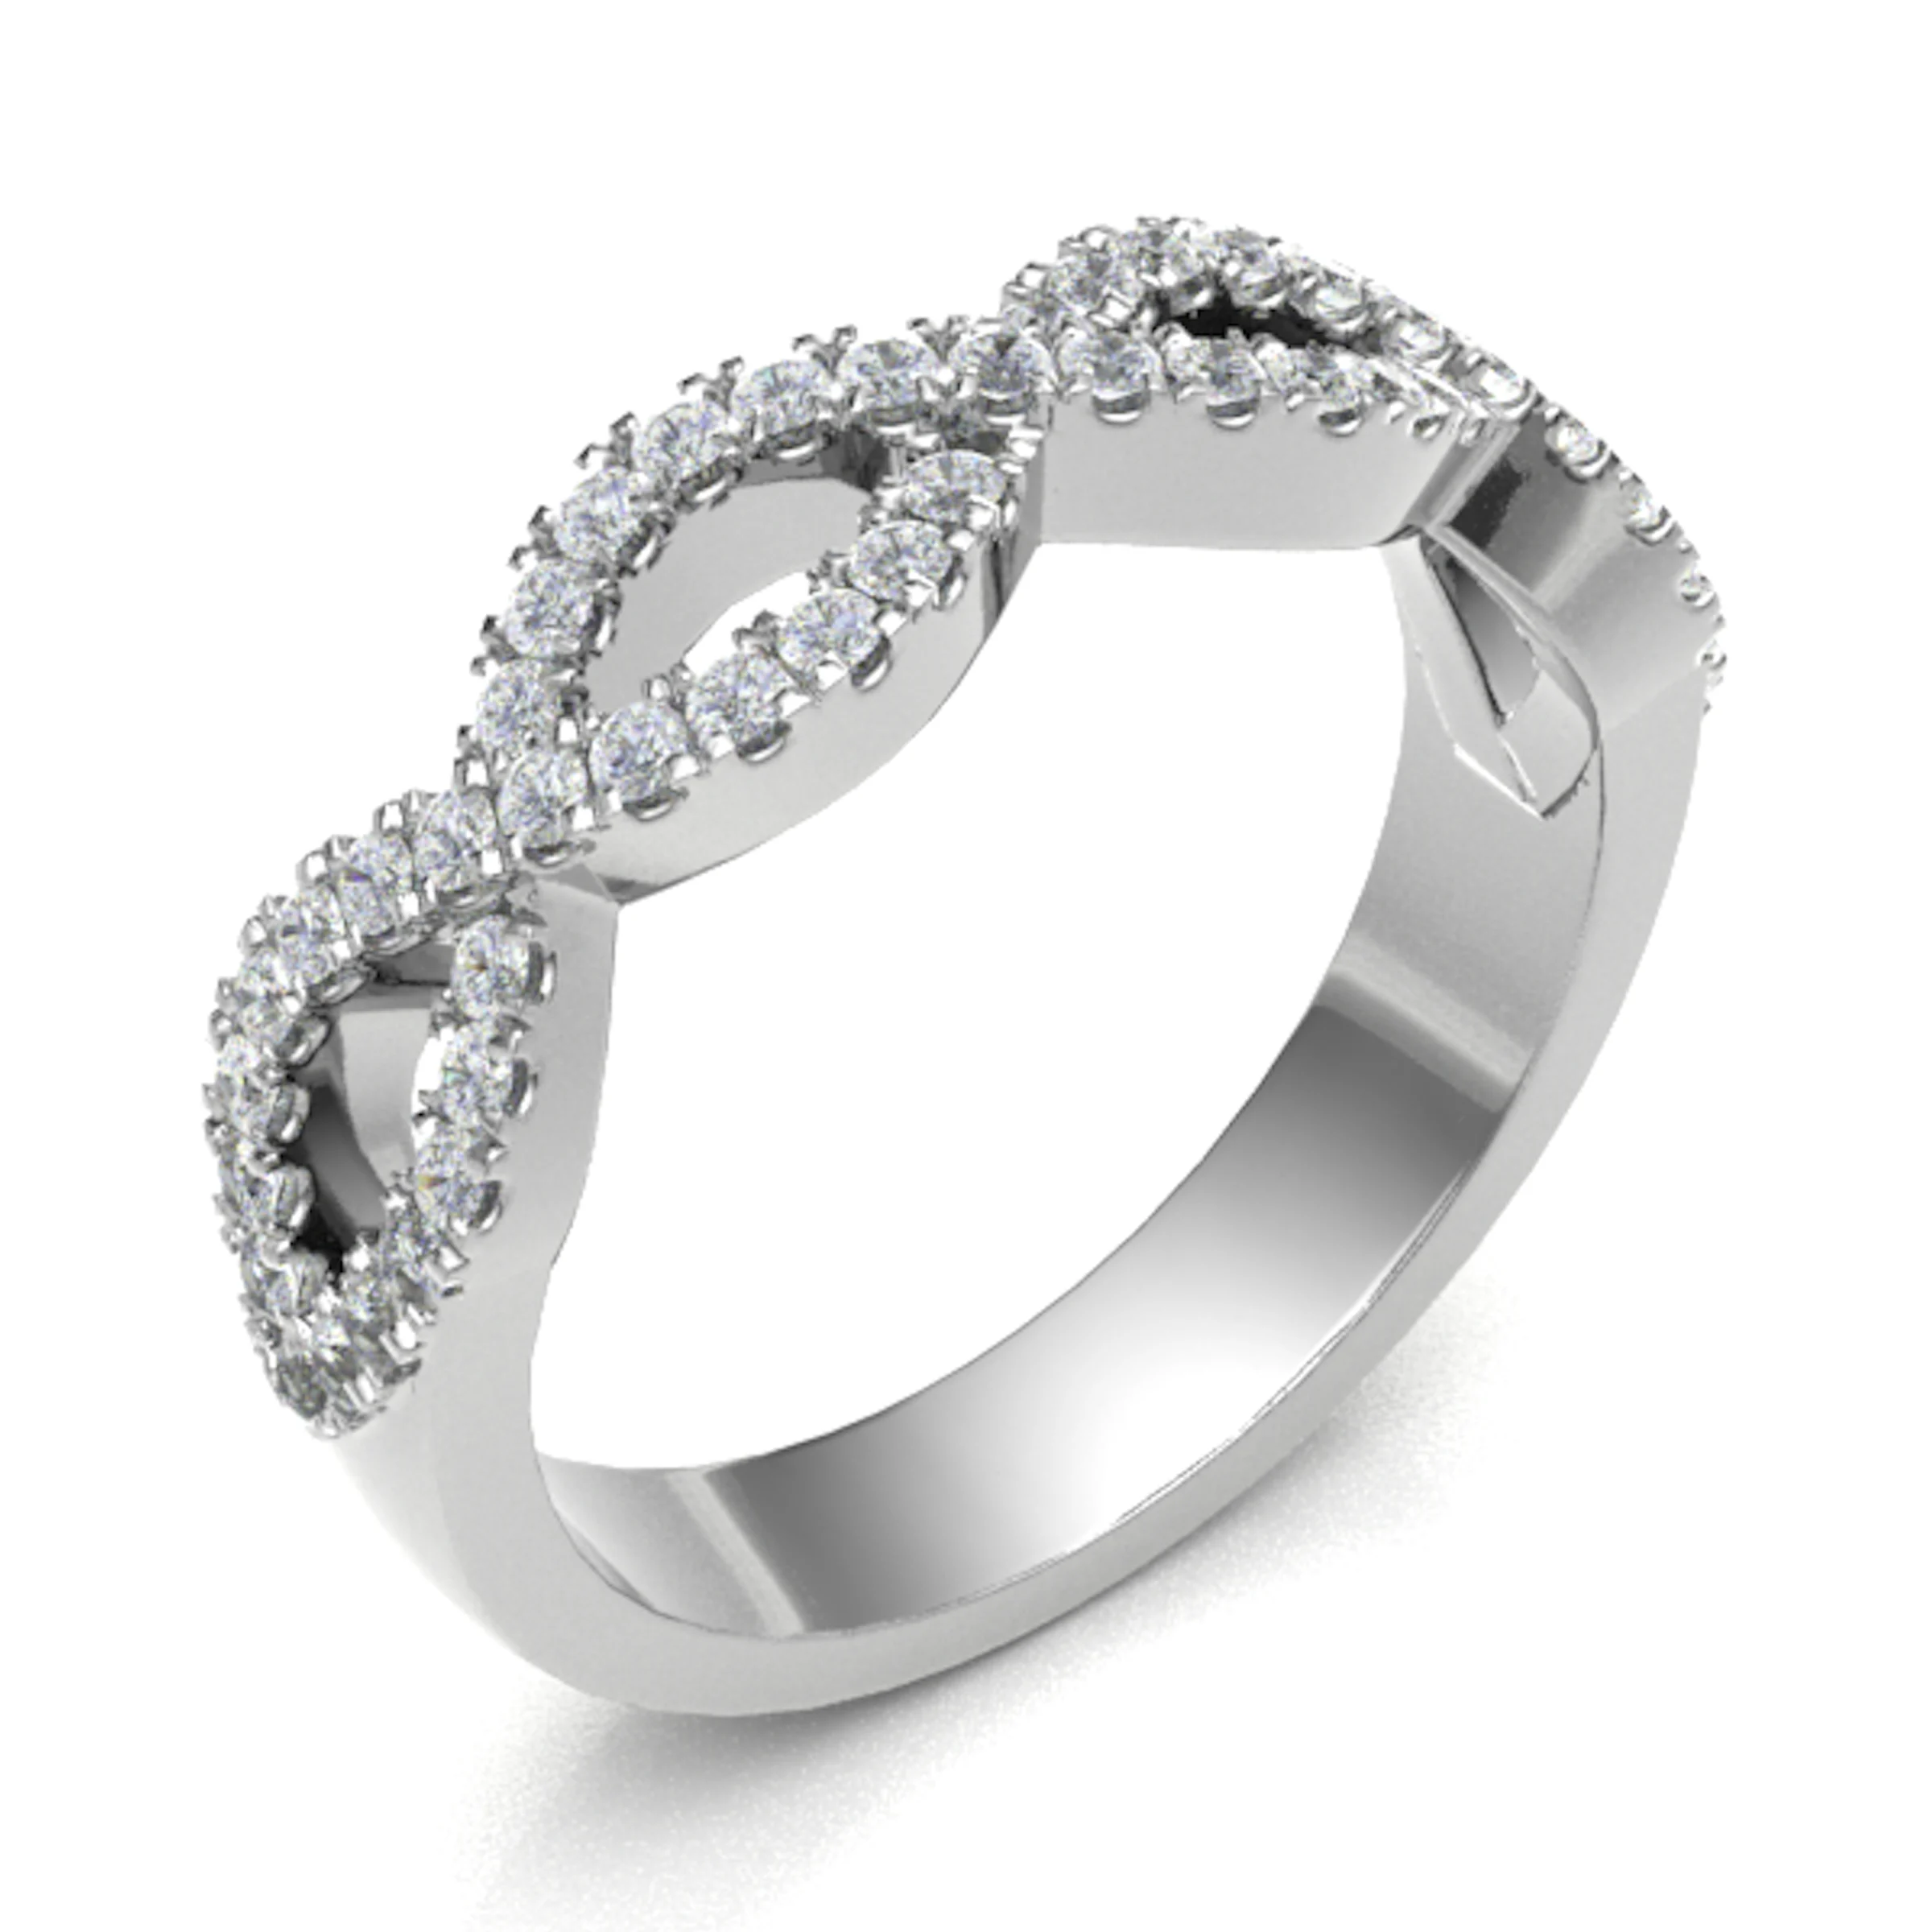 0.33 Carat Round Diamonds Twisted Half Eternity Ring with Micro Claw Set